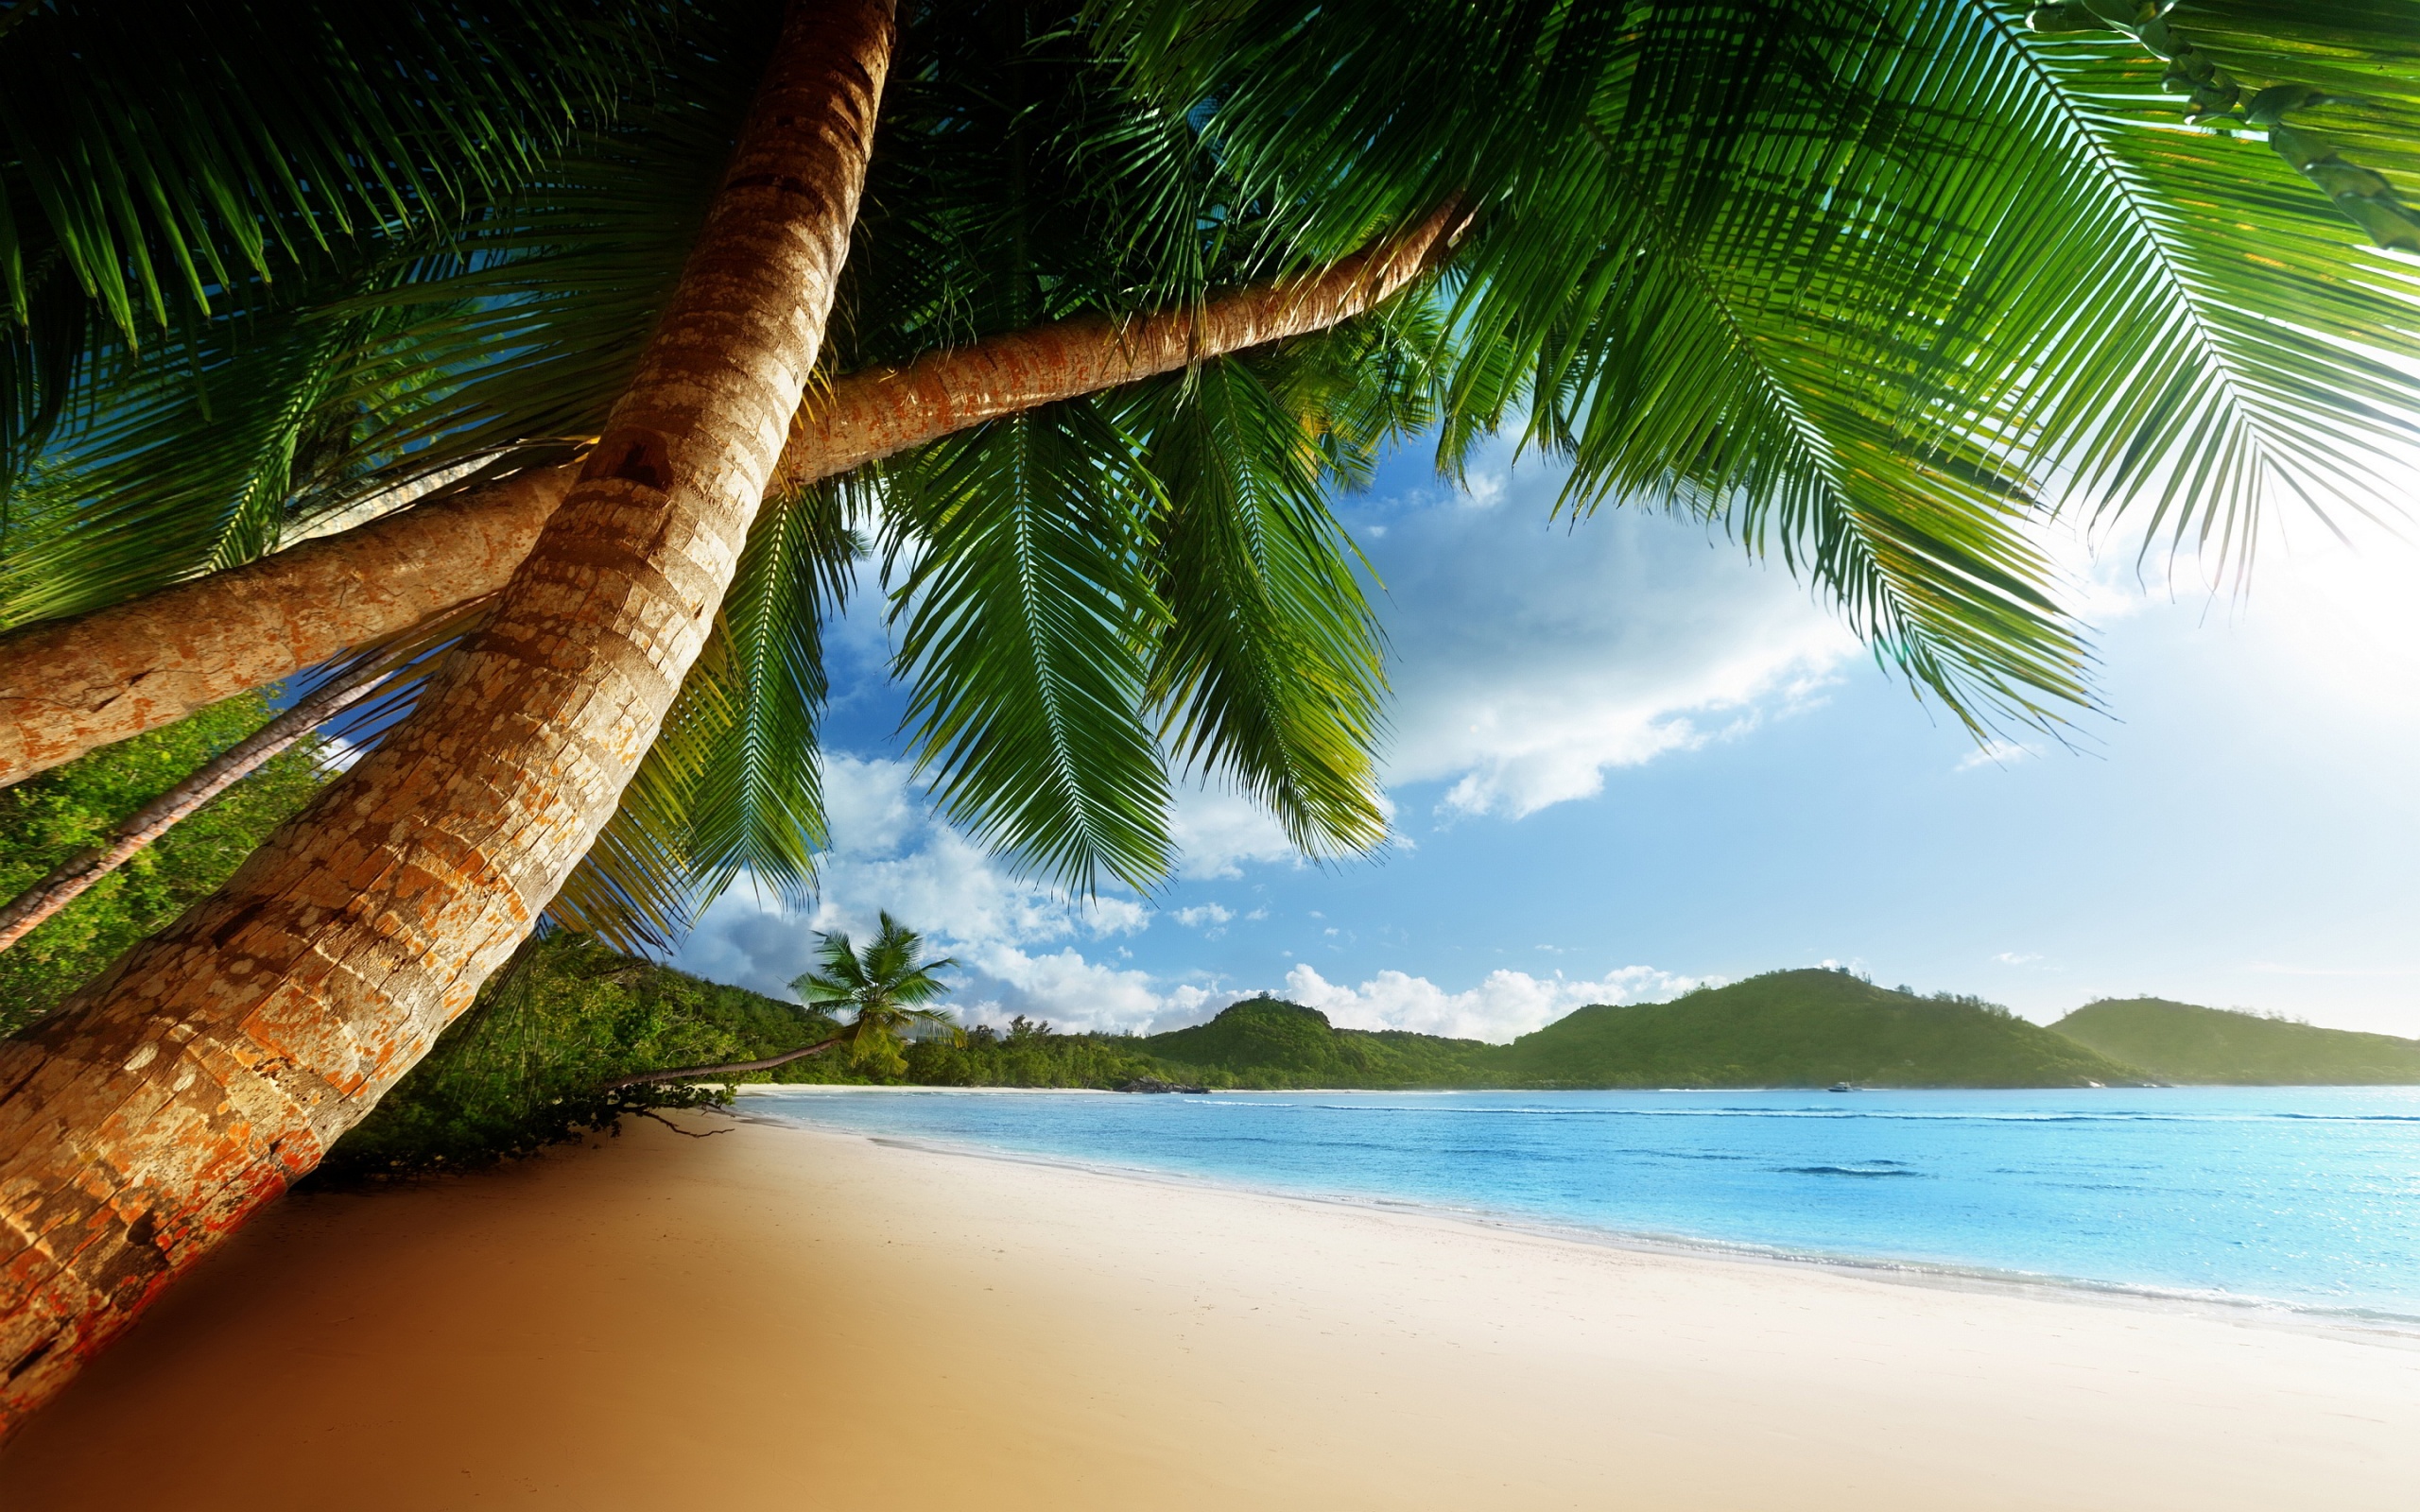 Caribbean Wallpaper 12 - Caribbean Wallpaper Hd , HD Wallpaper & Backgrounds